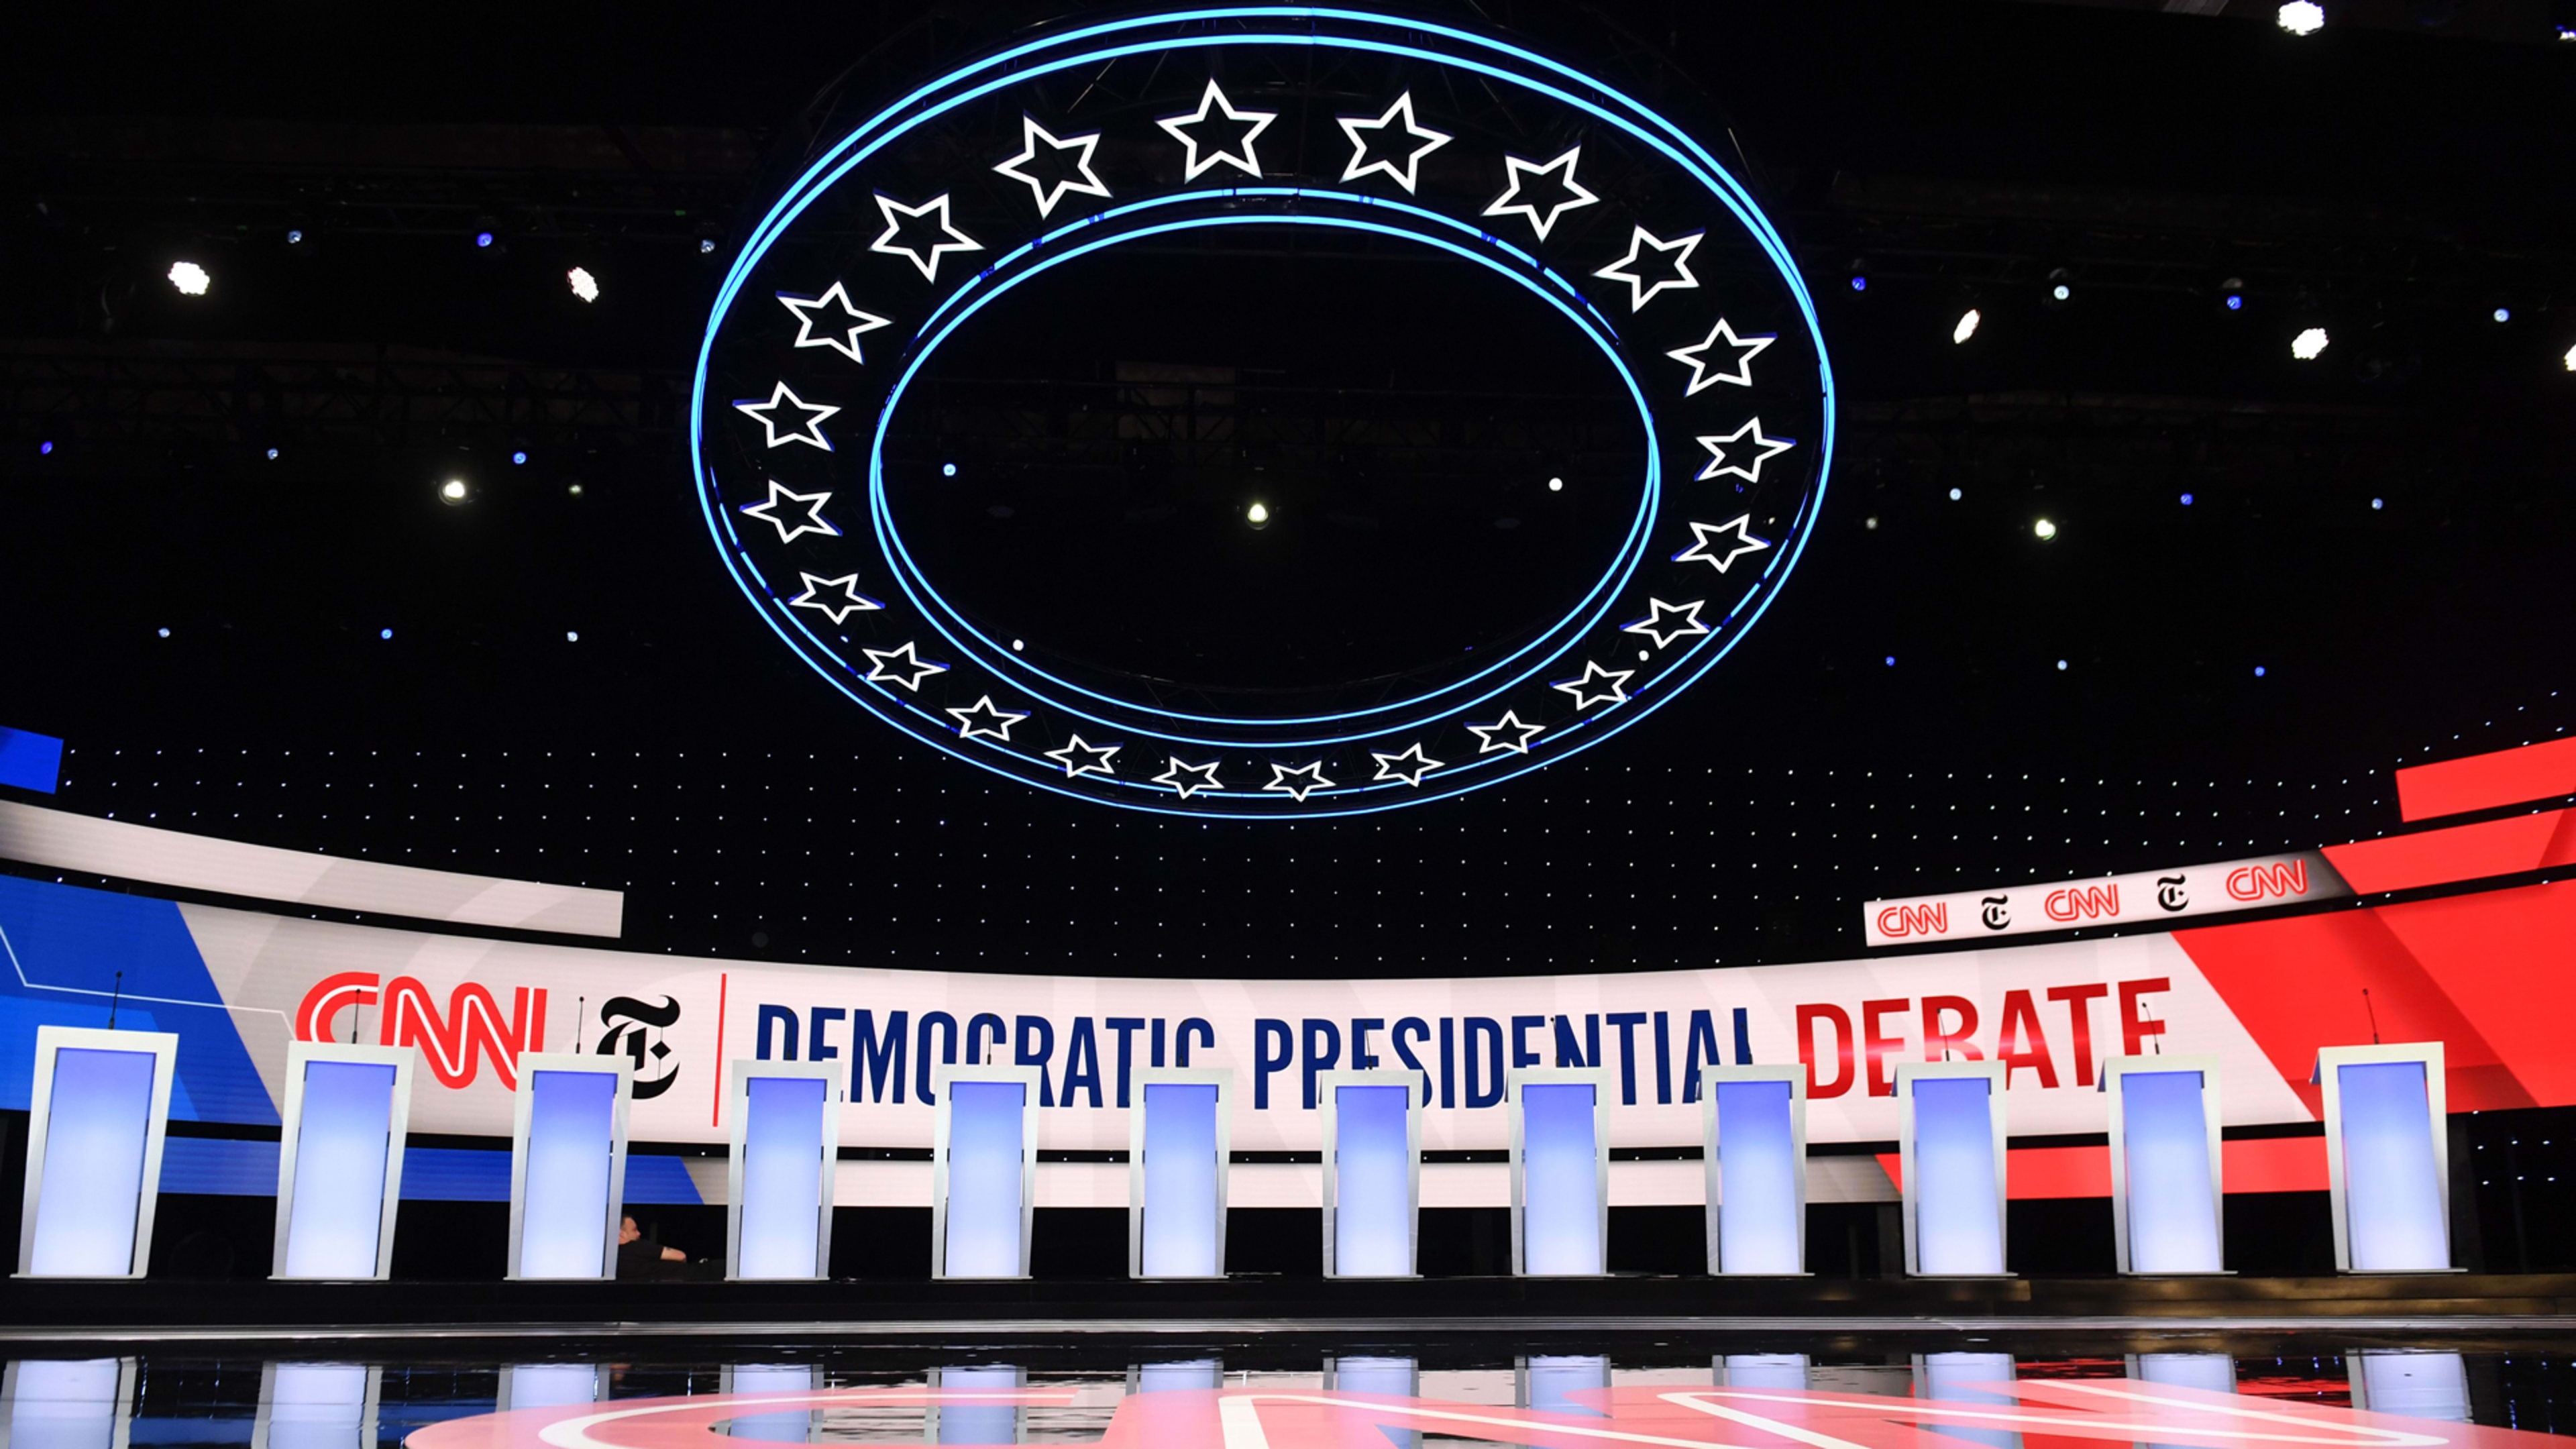 How to watch the Democratic debate free on CNN live without cable